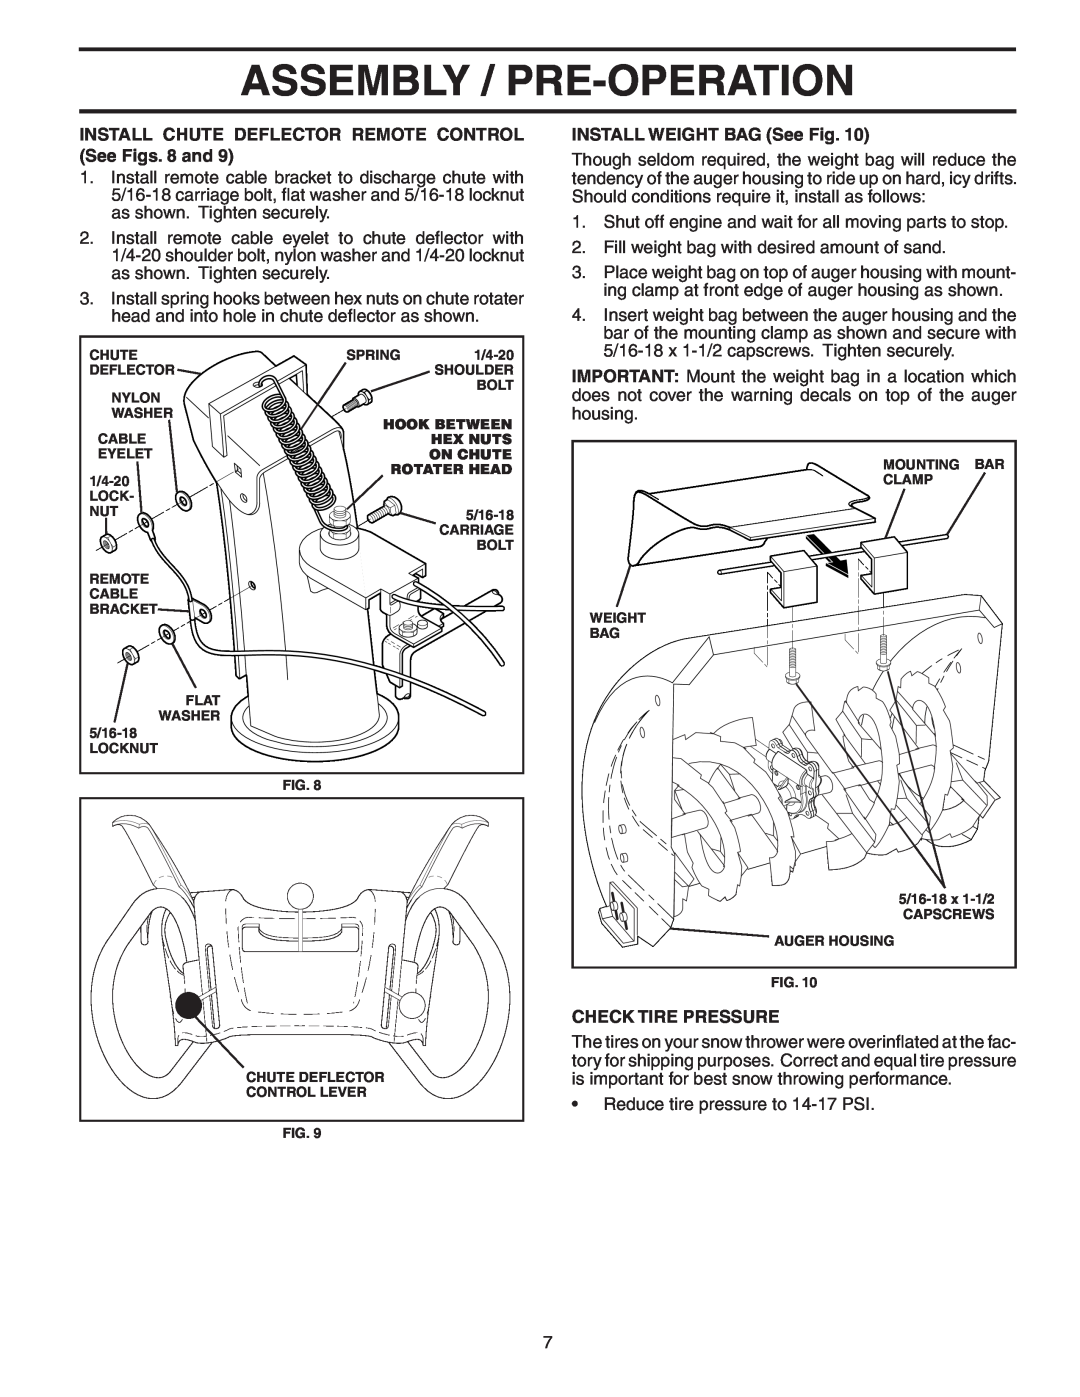 Poulan 183616 Assembly / Pre-Operation, INSTALL CHUTE DEFLECTOR REMOTE CONTROL See Figs. 8 and, INSTALL WEIGHT BAG See Fig 